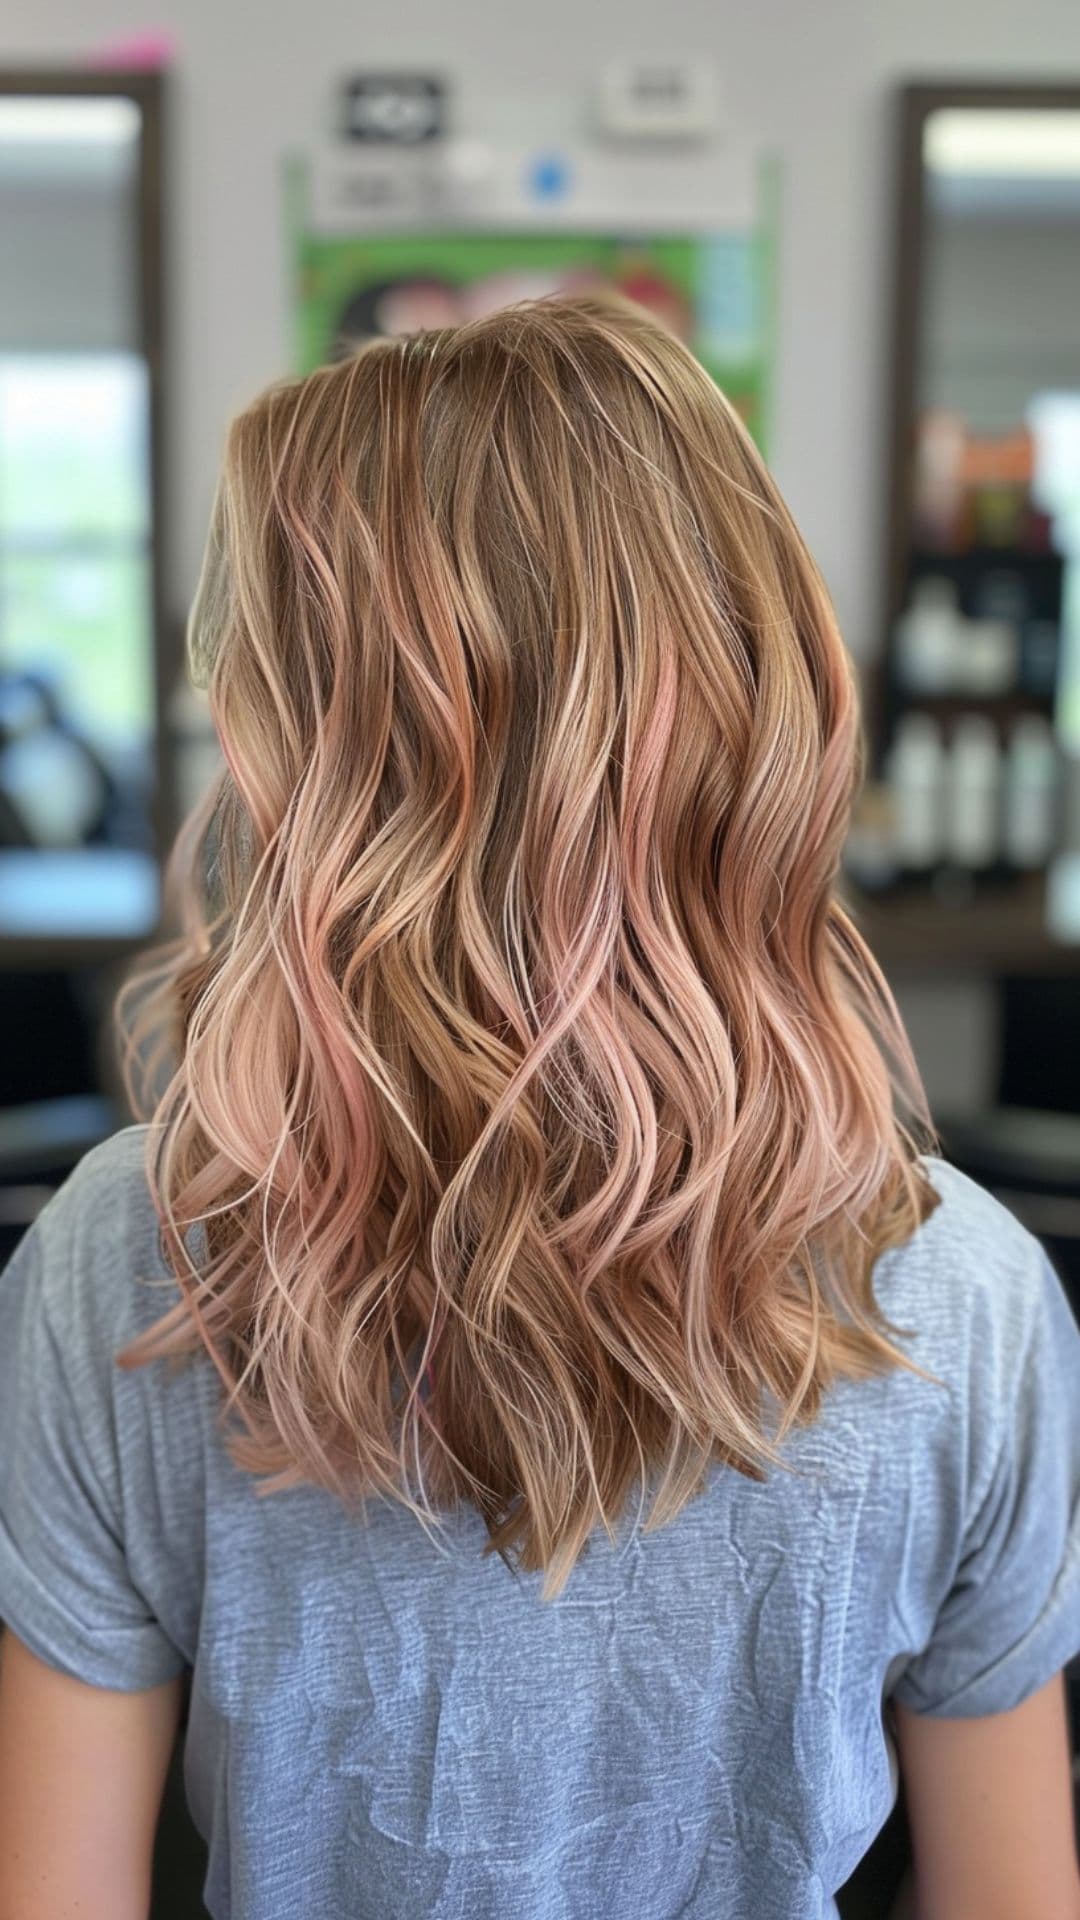 A woman modelling a pink and rose gold highlights.